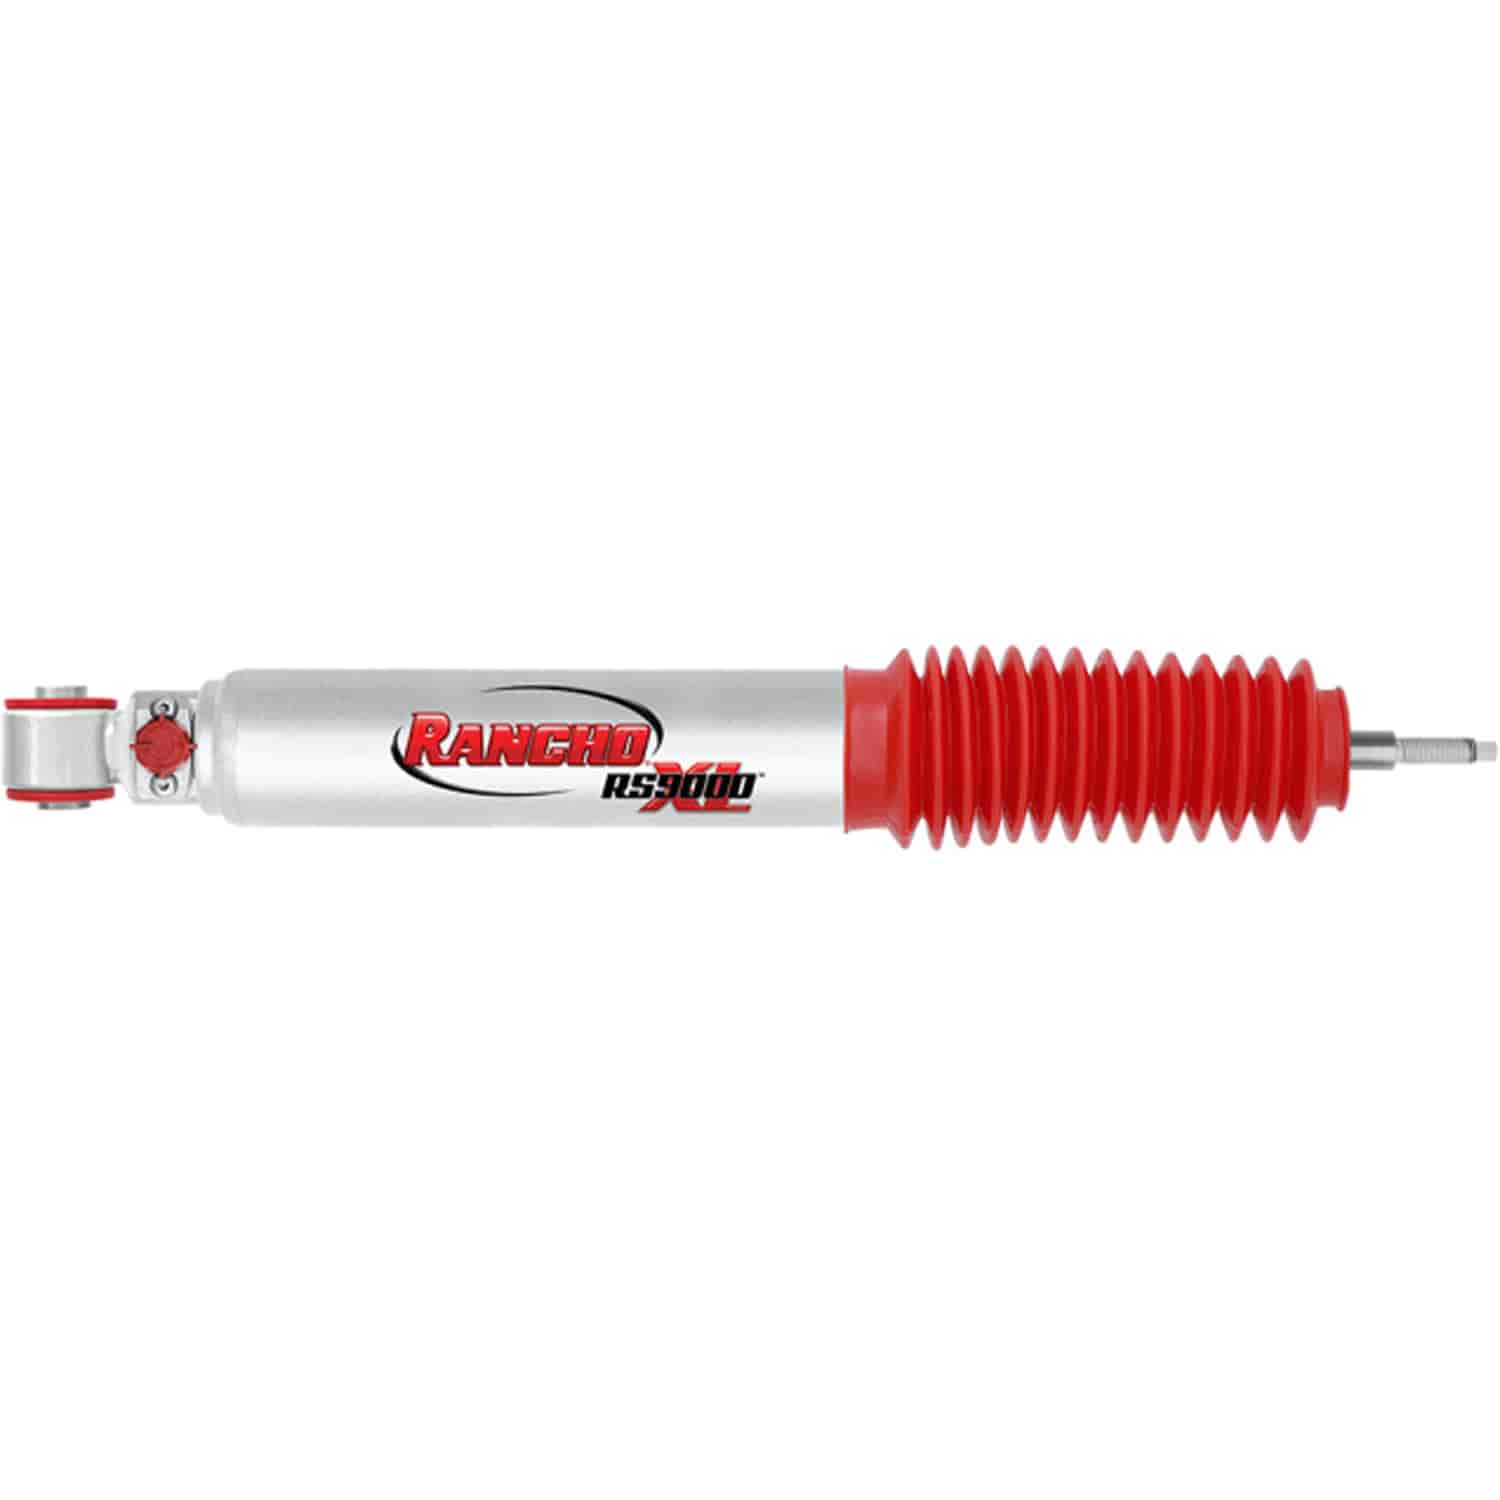 RS9000XL Rear Shock Absorber Fits Toyota Land Cruiser